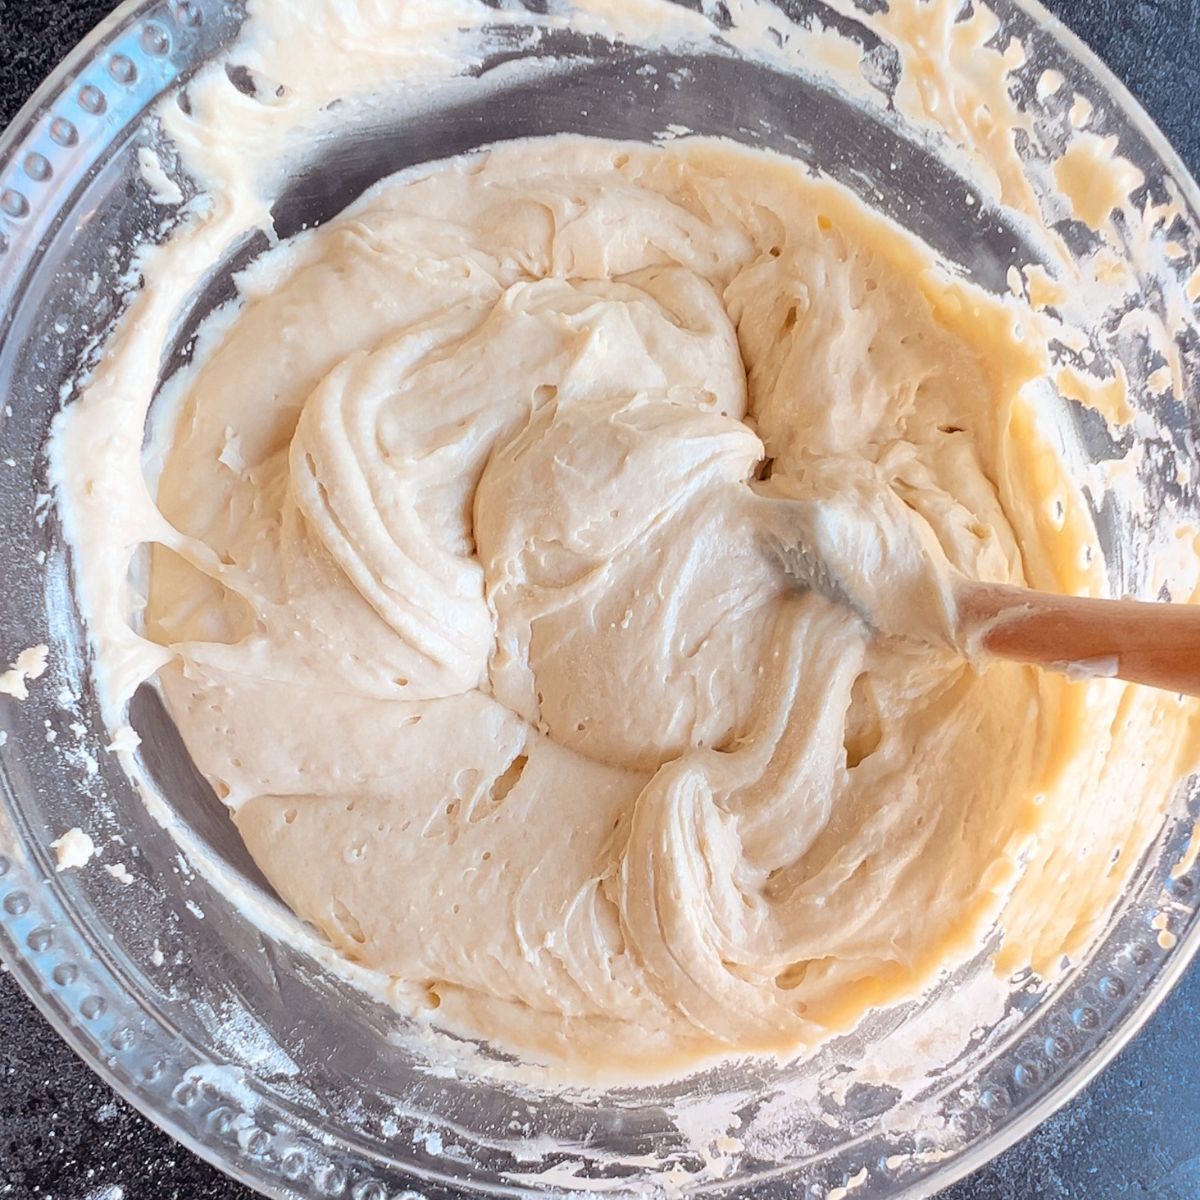 Almond coffee cake batter mixed together in a mixing bowl.